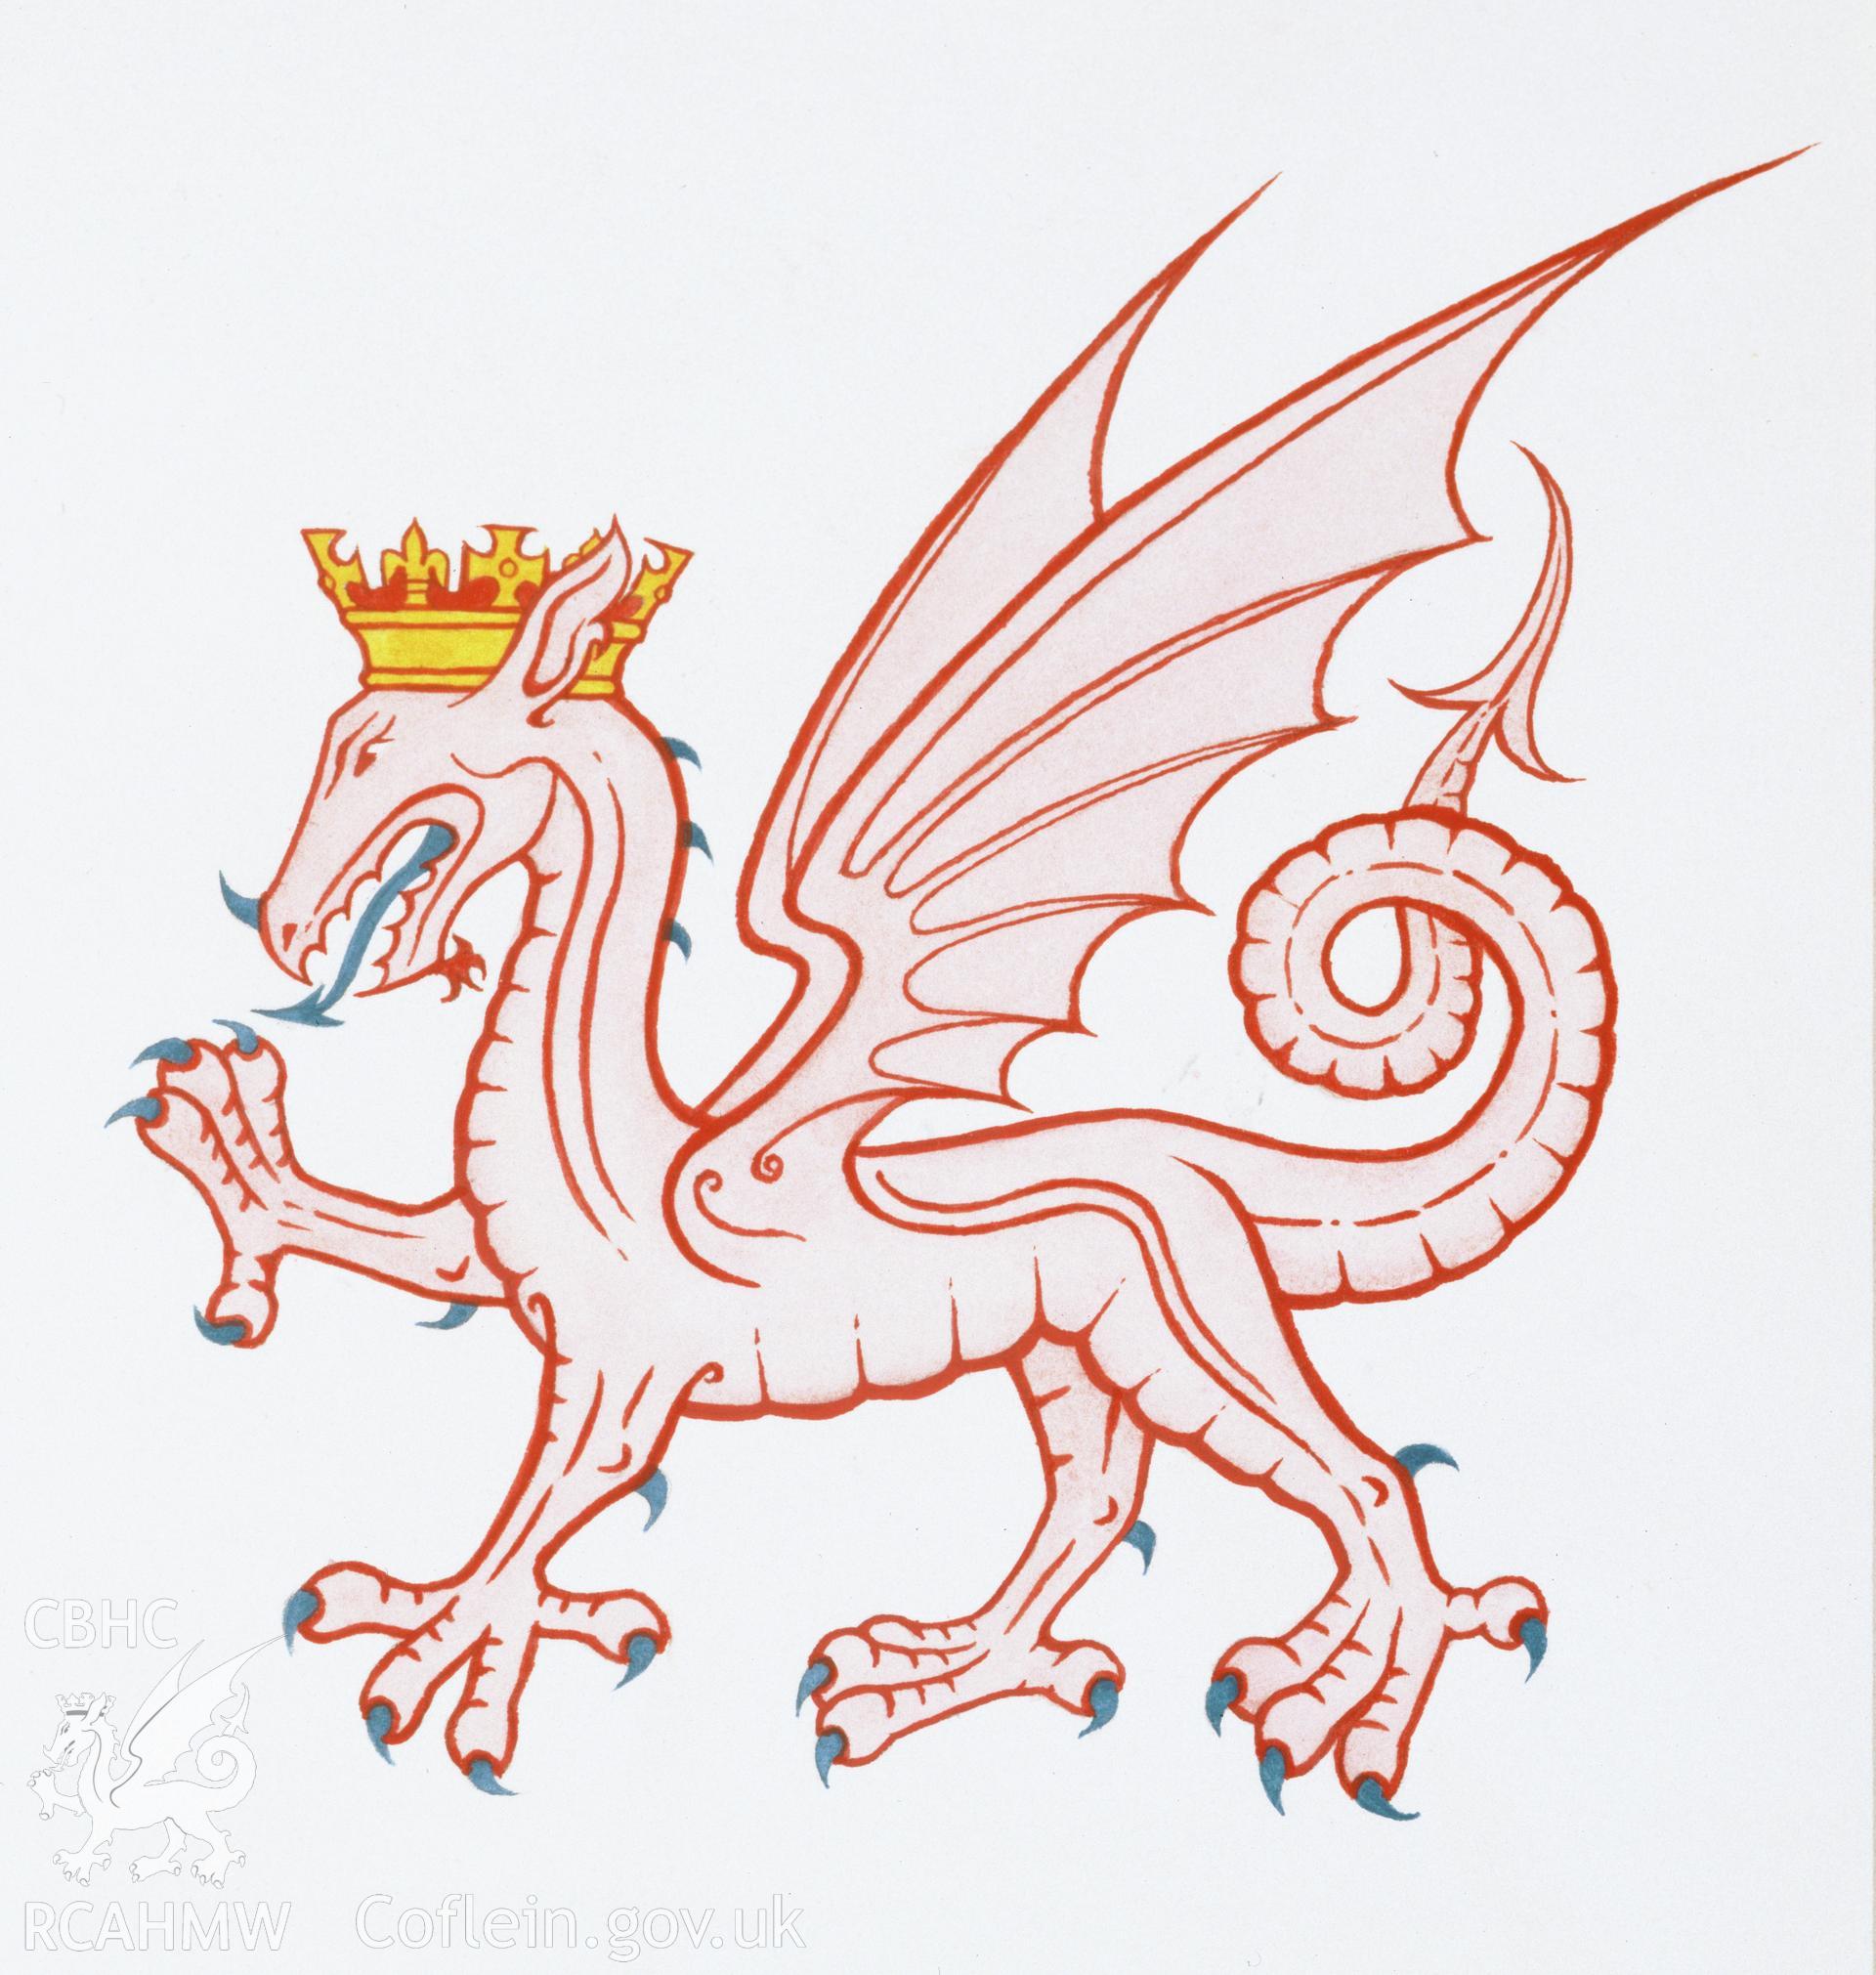 Colour transparency of an original painting of the Royal Commissions dragon badge.